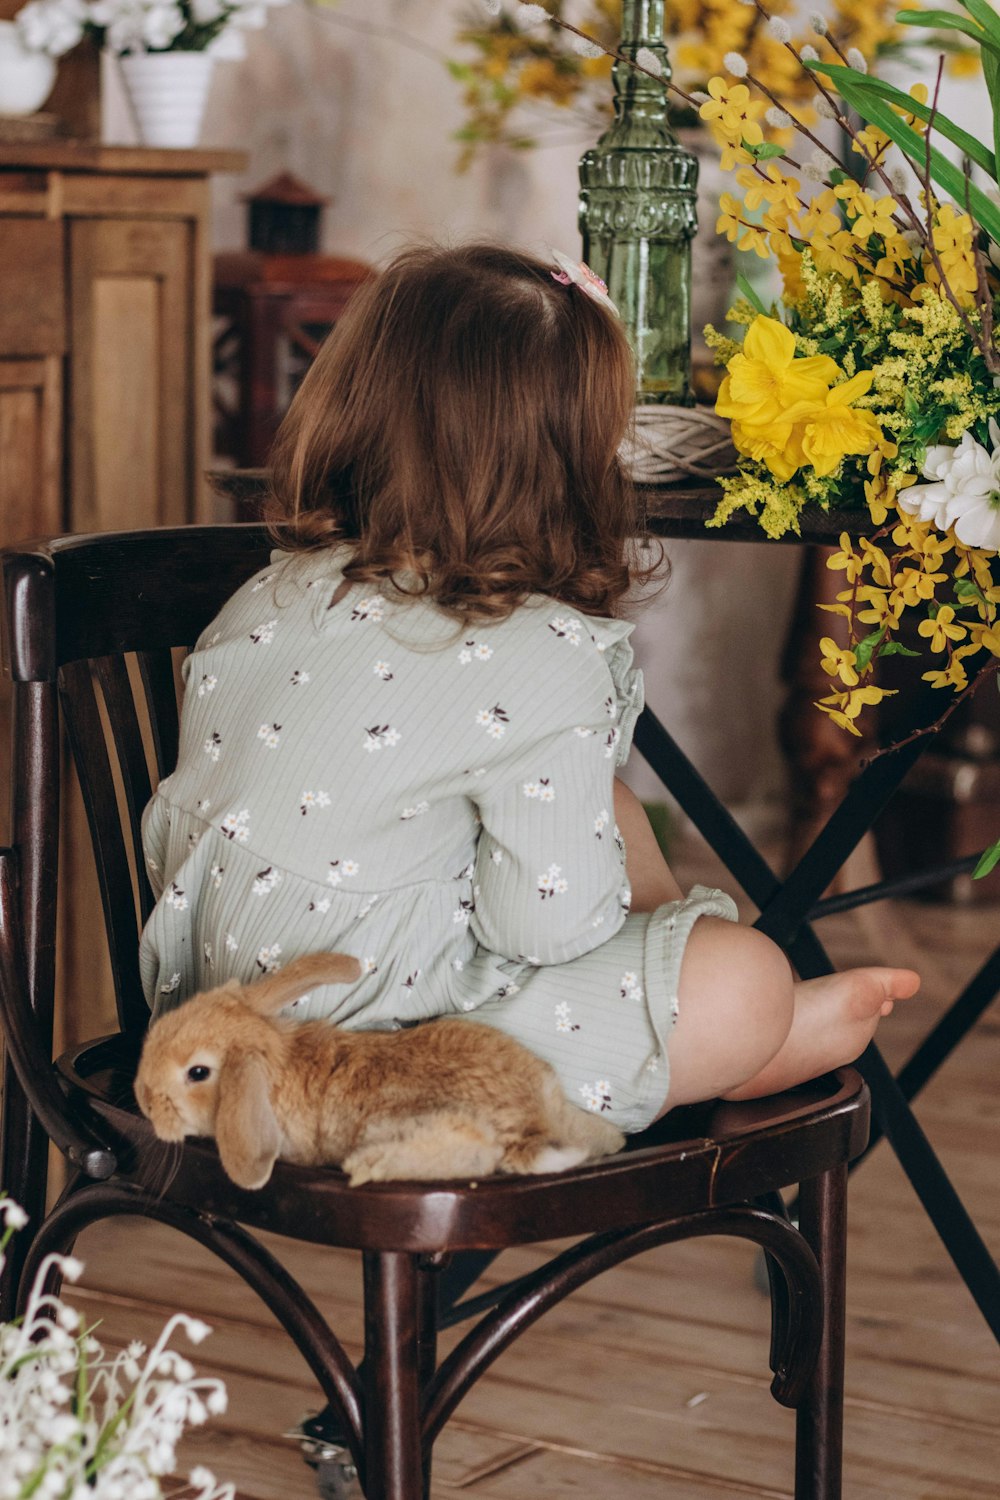 a little girl sitting in a chair with a stuffed animal